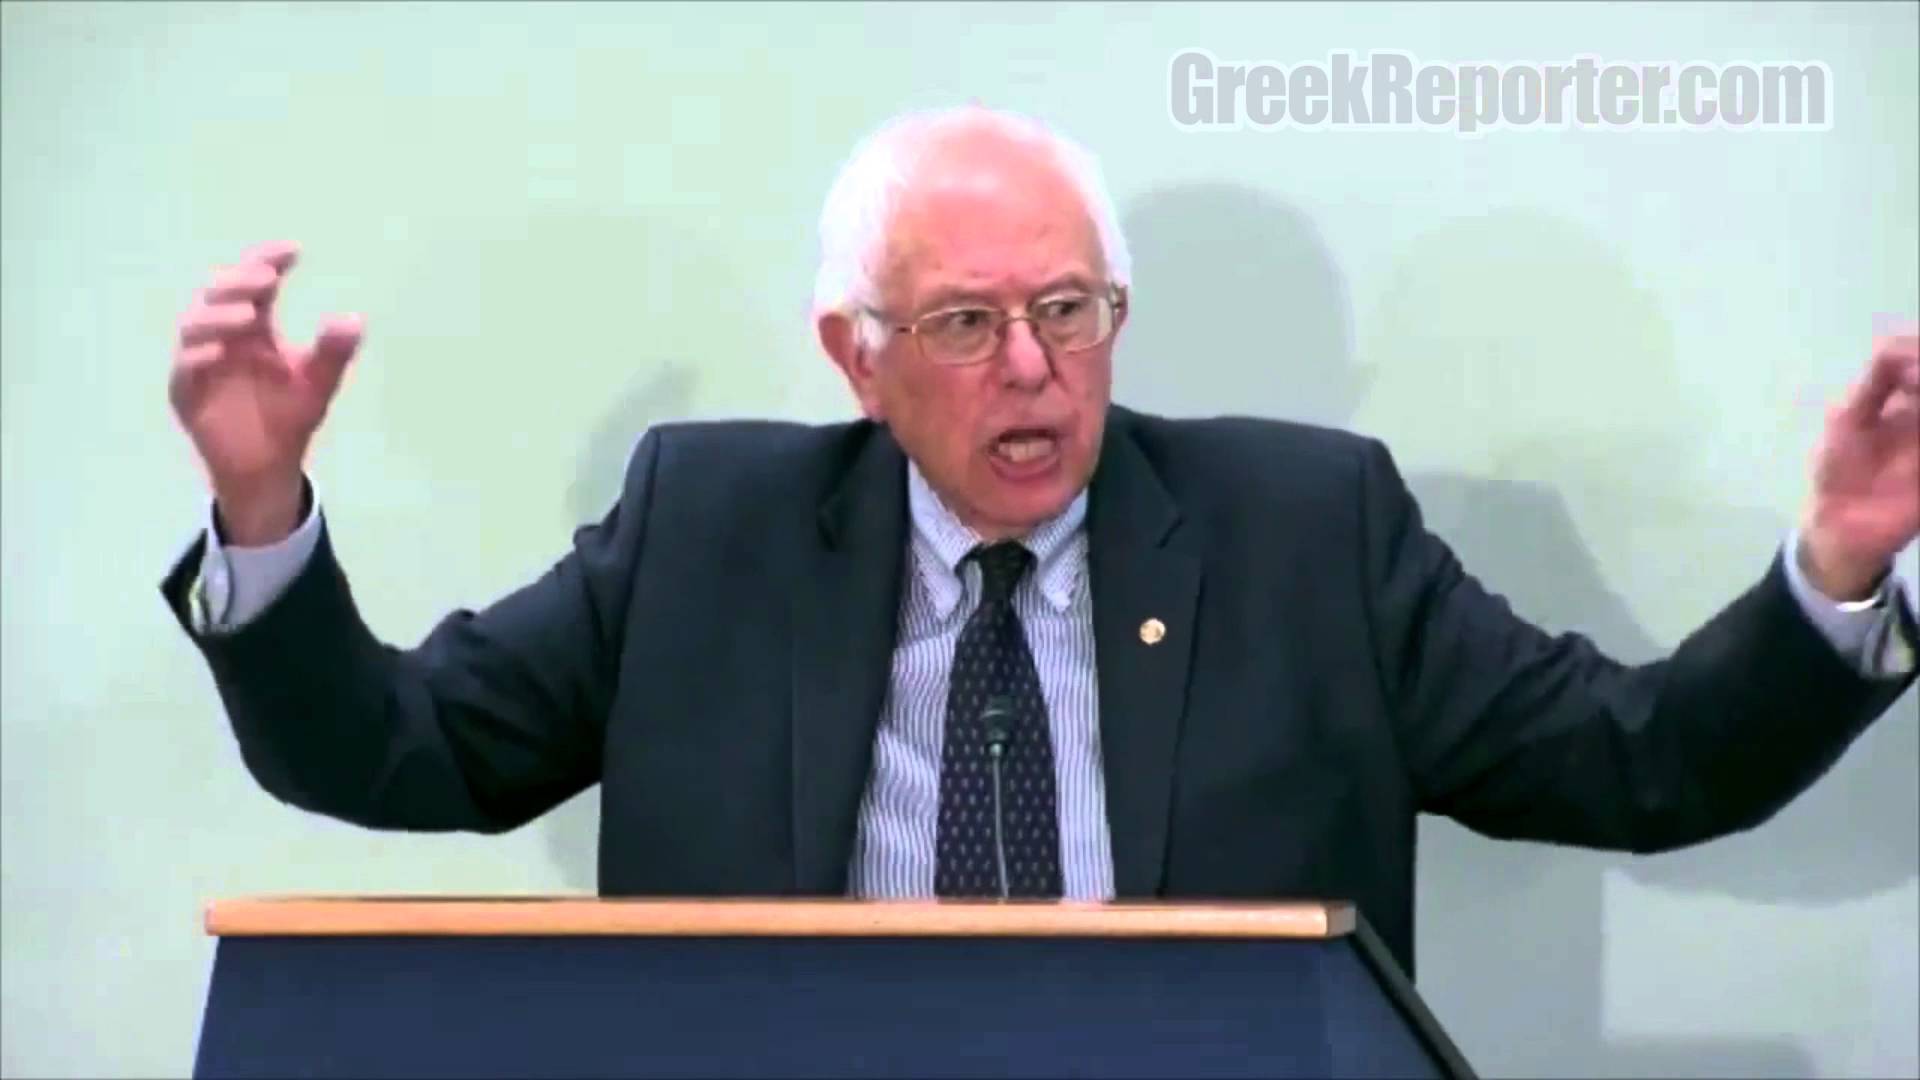 Here’s What Bernie Sanders Has to Say about Greece on July 30 in the Hart Senate Office Building at a hearing on the Greek debt crisis